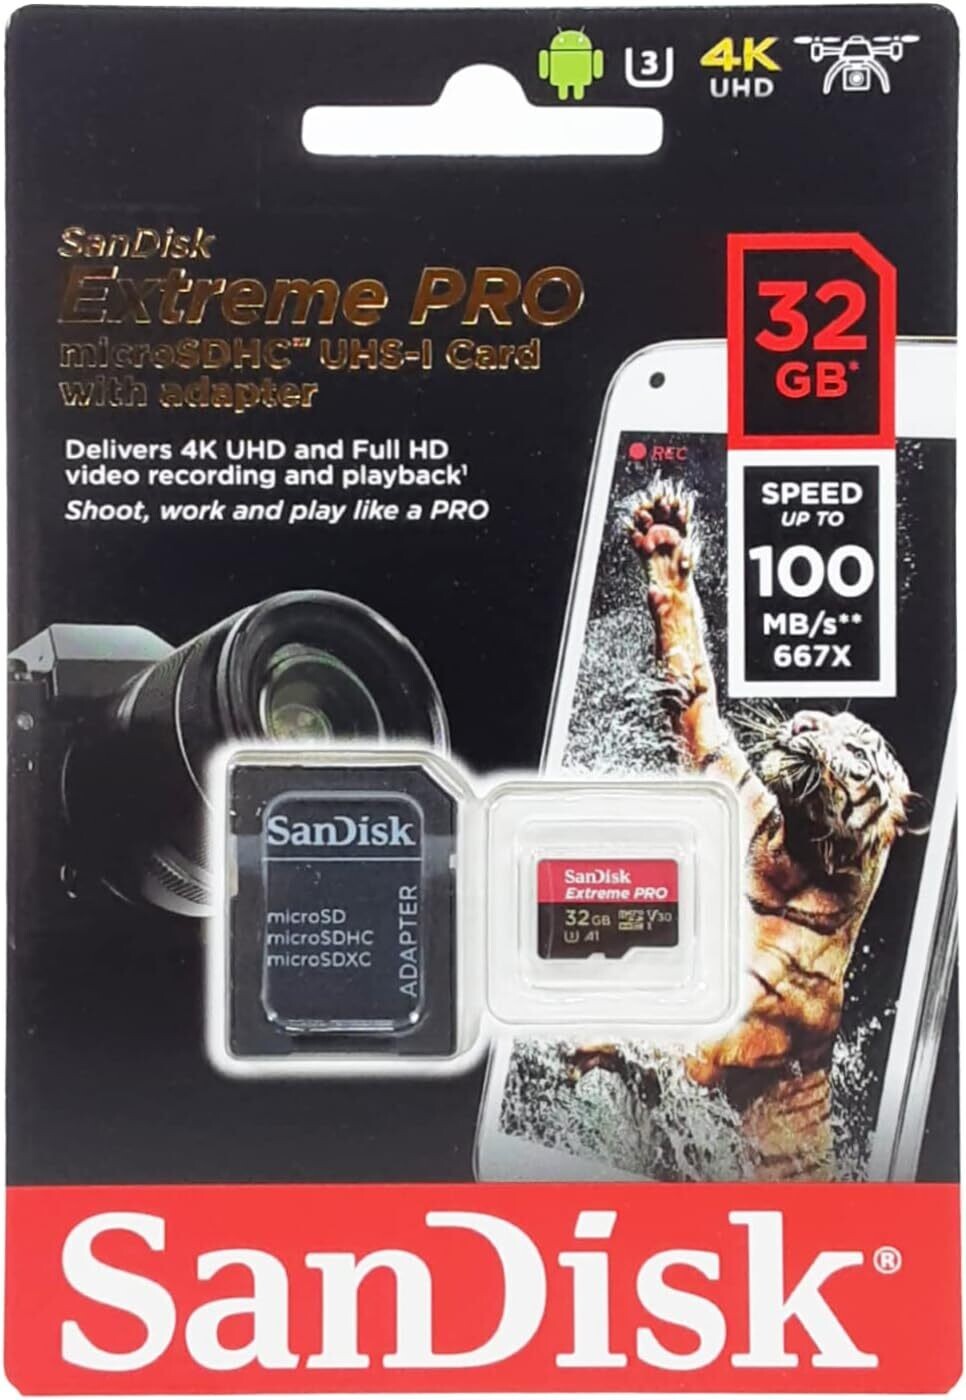 SanDisk Extreme Pro 32 GB microSDHC Memory Card + SD Adapter with A1 App Performance + Rescue Pro Deluxe 100 MB/s Class 10, UHS-I, U3, V30 SDSQXCG-032G-GN6MA, Red/Gold